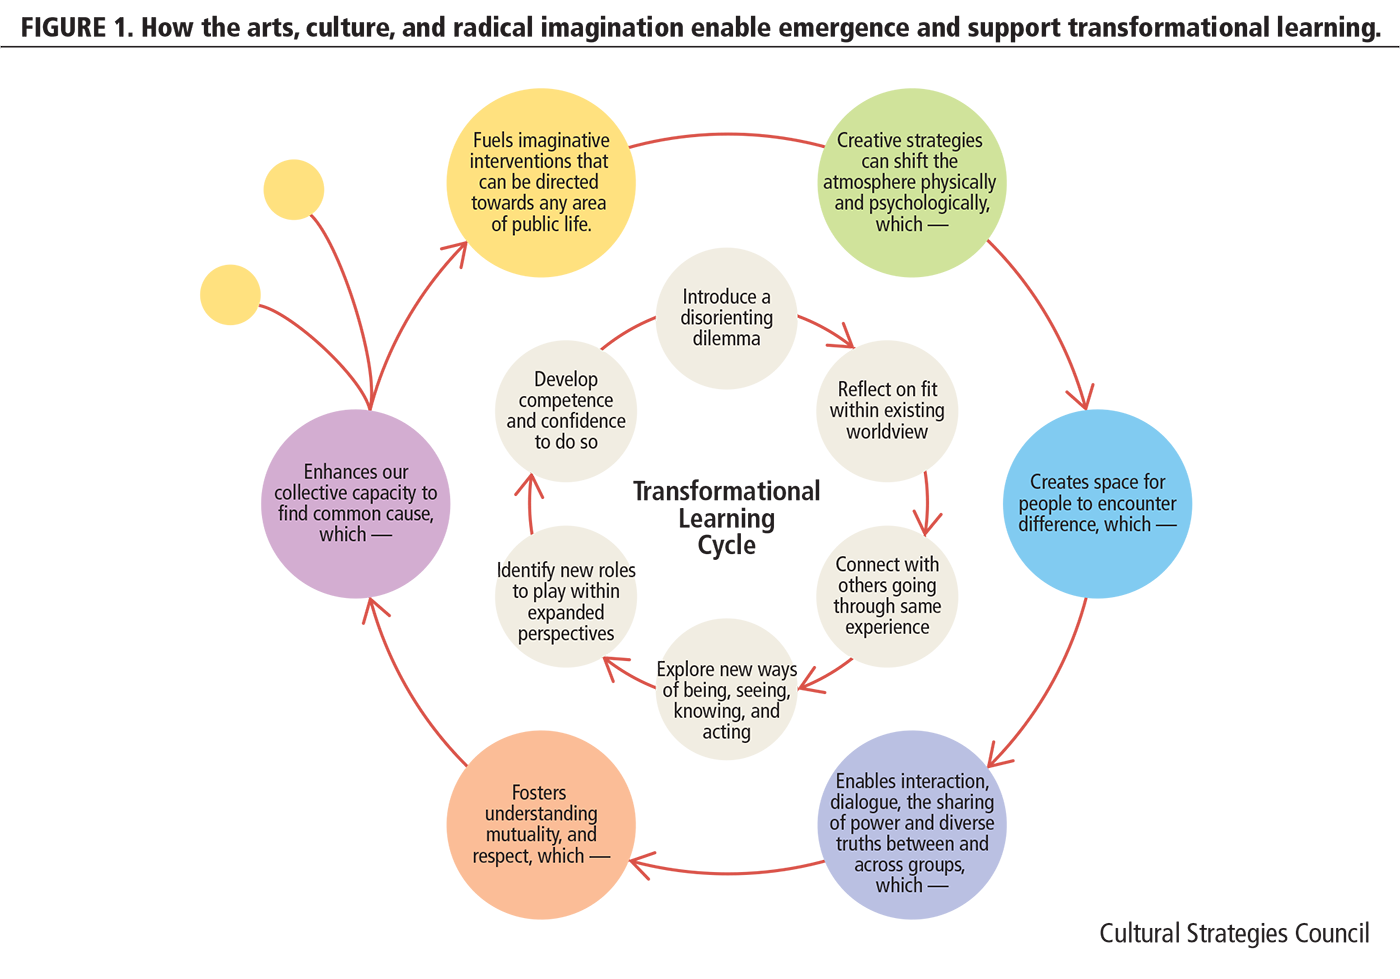 Figure 1. How the arts, culture, and radical imagination enable emergence and support transformational learning.